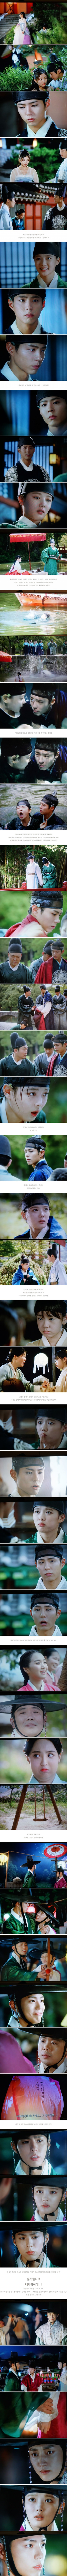 episode 5 captures for the Korean drama 'Moonlight Drawn by Clouds'